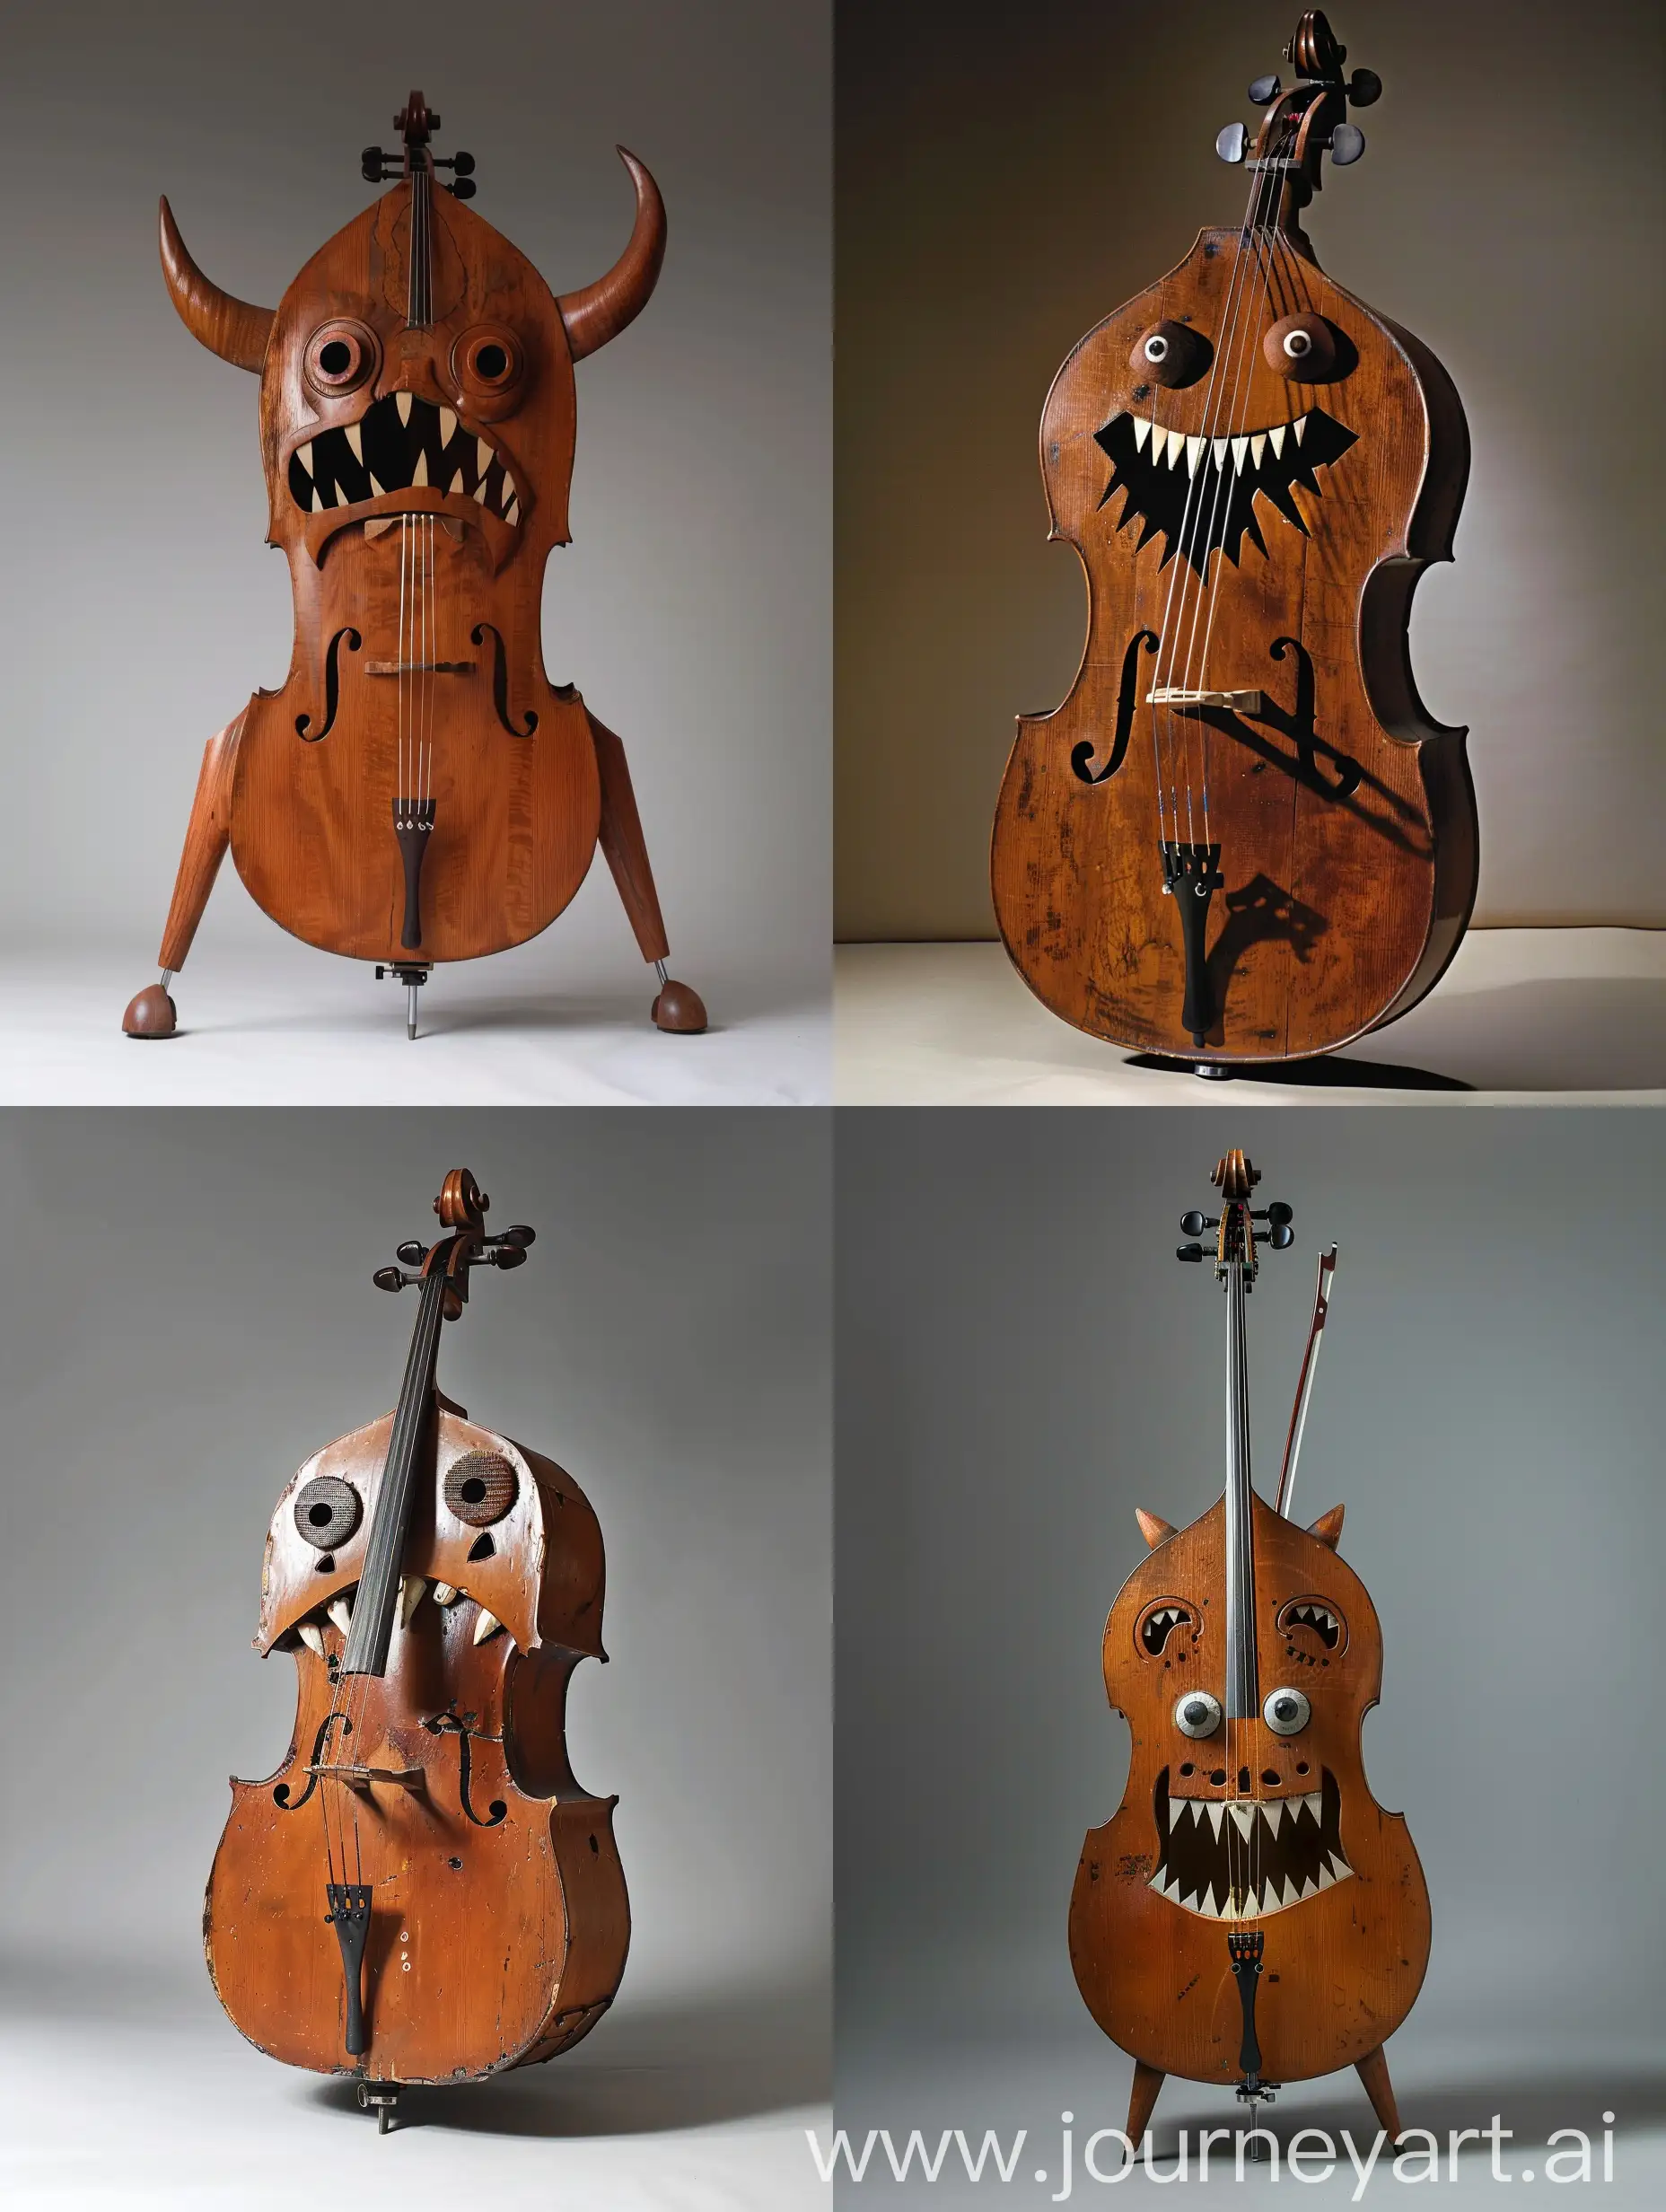 Cello-Monster-Emerging-in-Vibrant-Artistic-Display